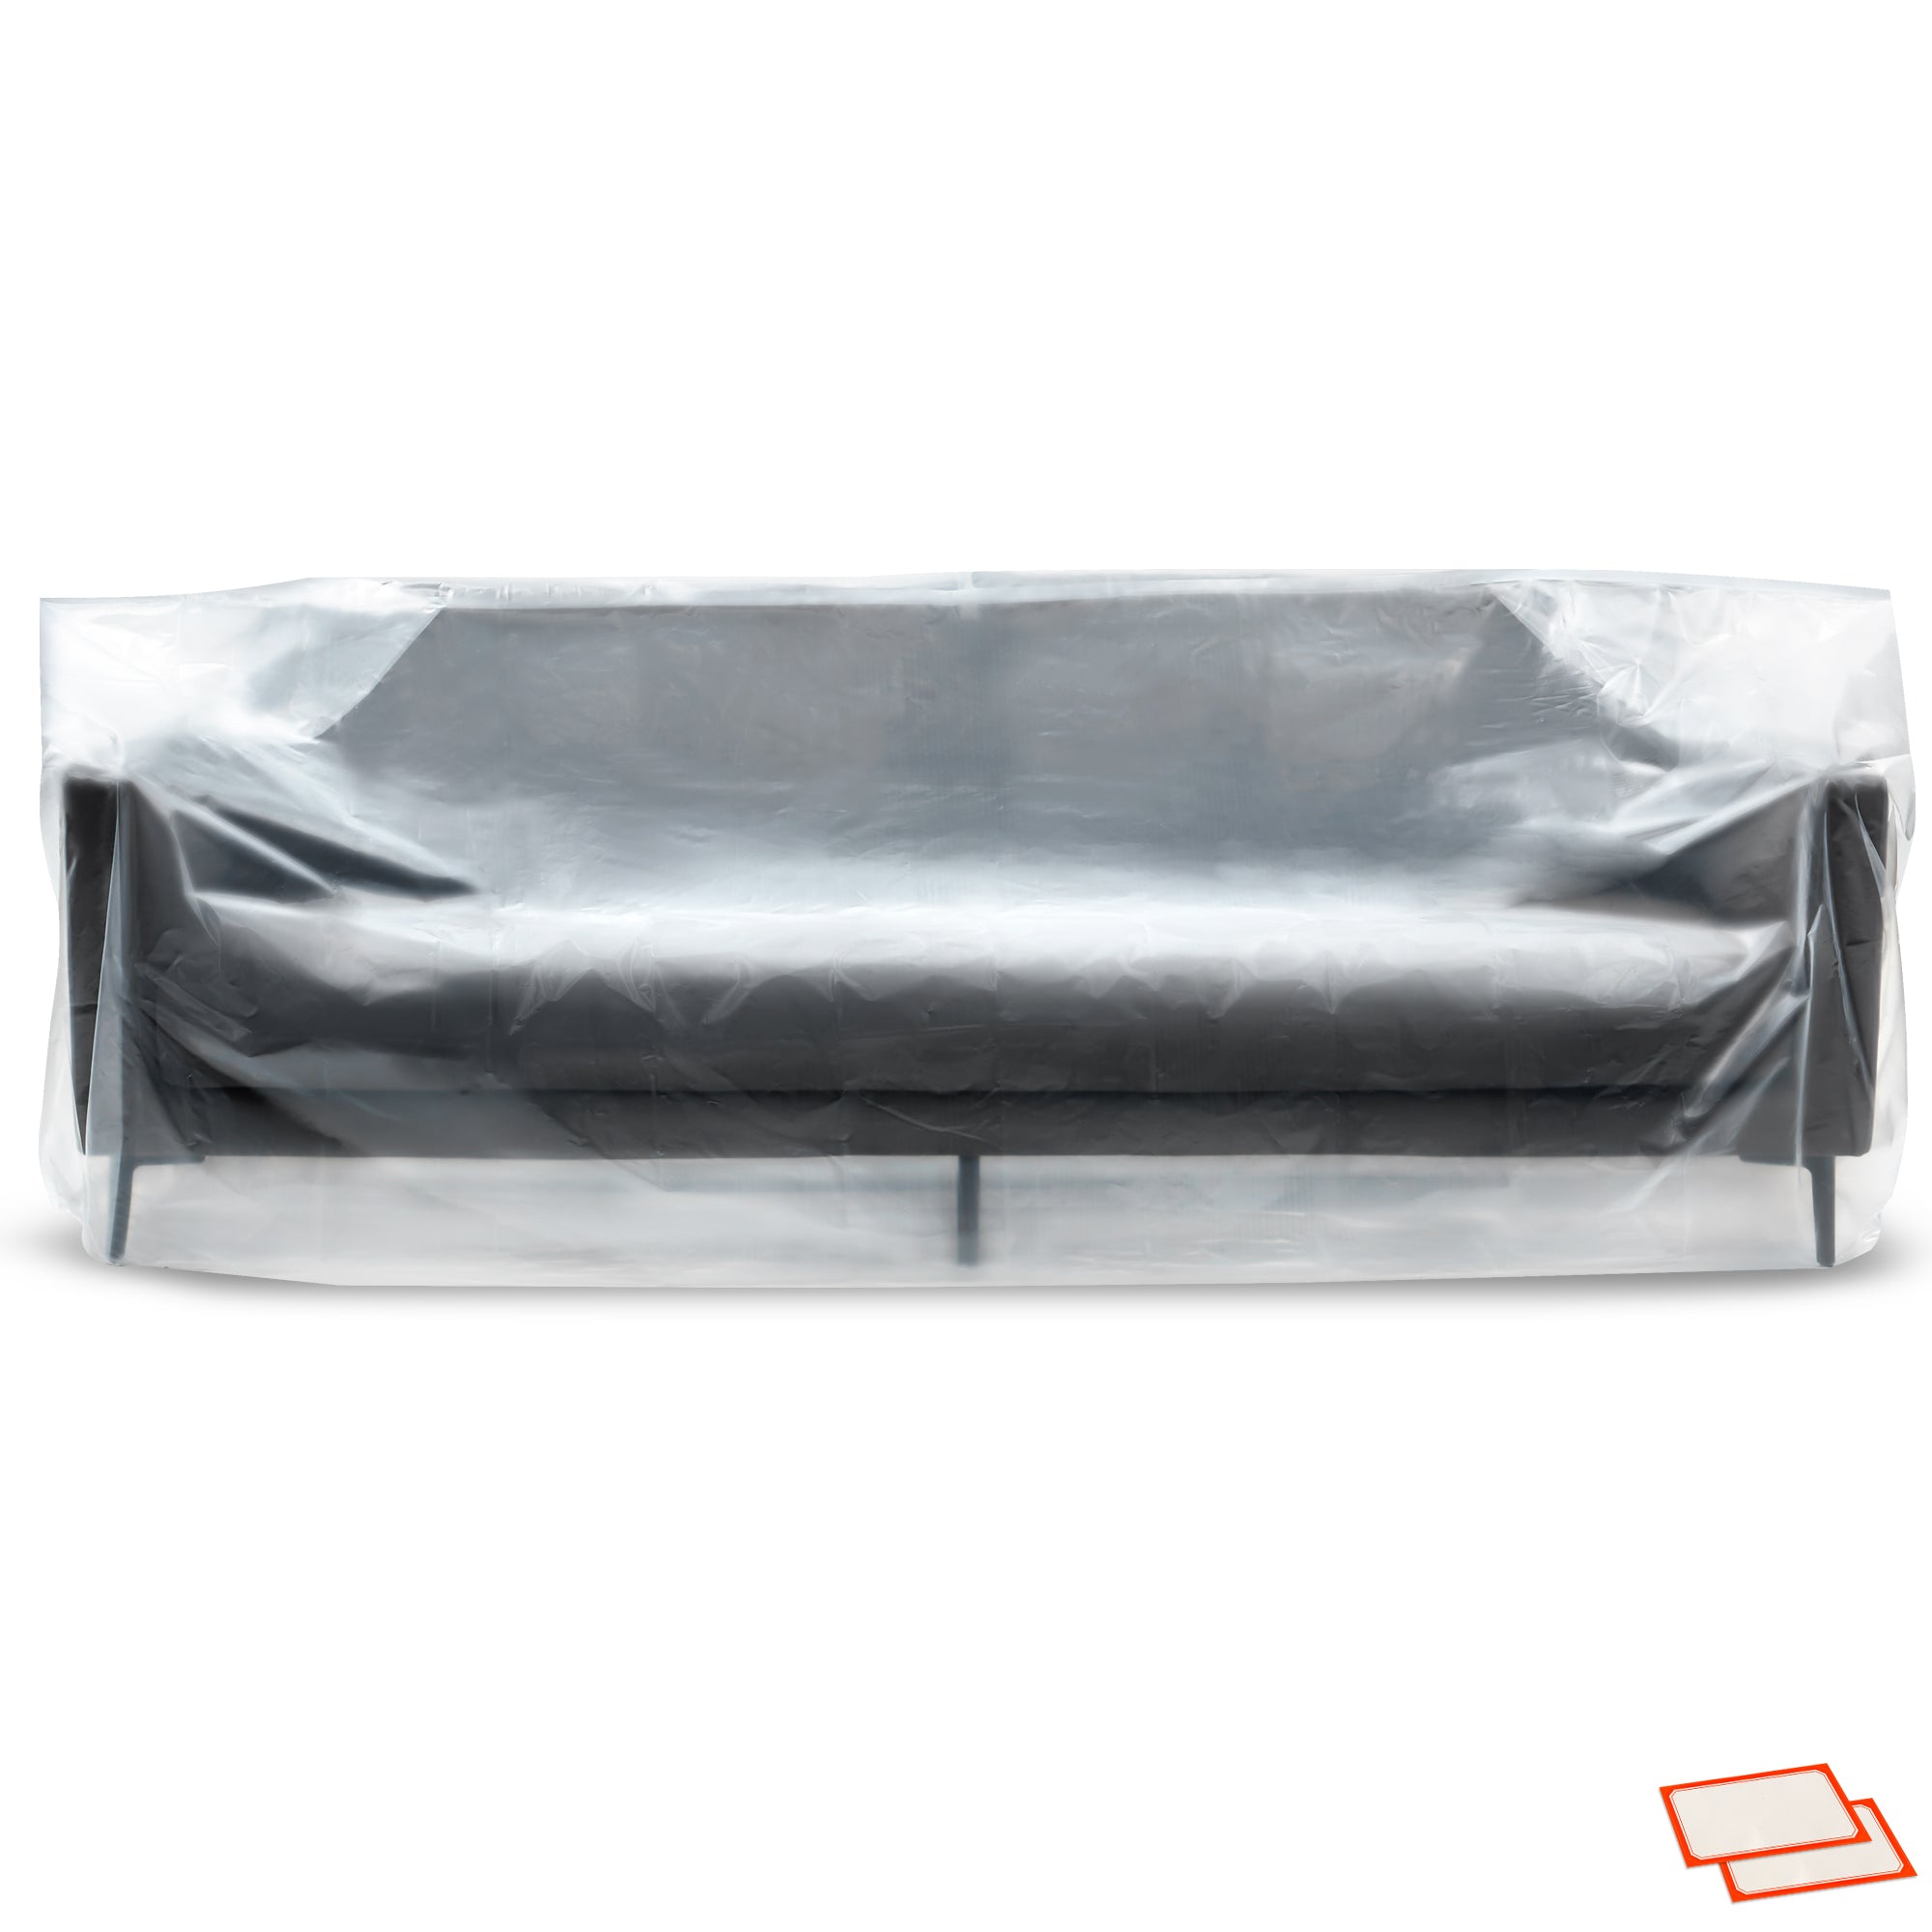 Plastic Furniture Covers for Moving - Heavy-Duty Plastic Couch Cover for Sofa, Waterproof & Dustproof Clear Moving Bags for Renovation, Wrap or Storage - Extra Large Bag Open Size 96 x 42 x 62 Inch